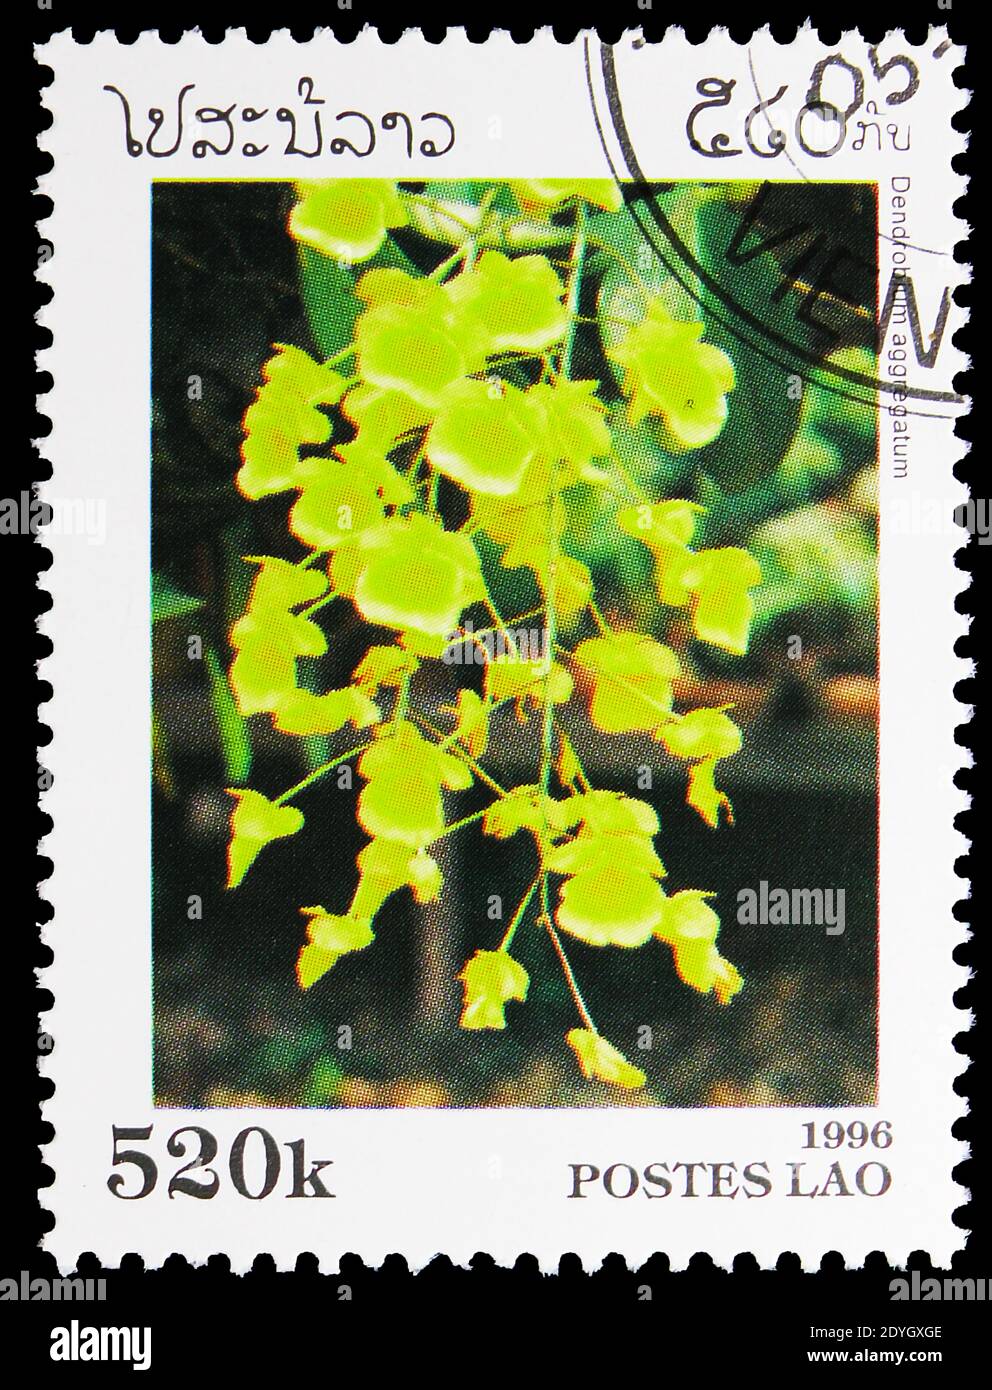 MOSCOW, RUSSIA - AUGUST 8, 2019: Postage stamp printed in Laos shows Dendrobium aggregatum, Orchids serie, circa 1996 Stock Photo